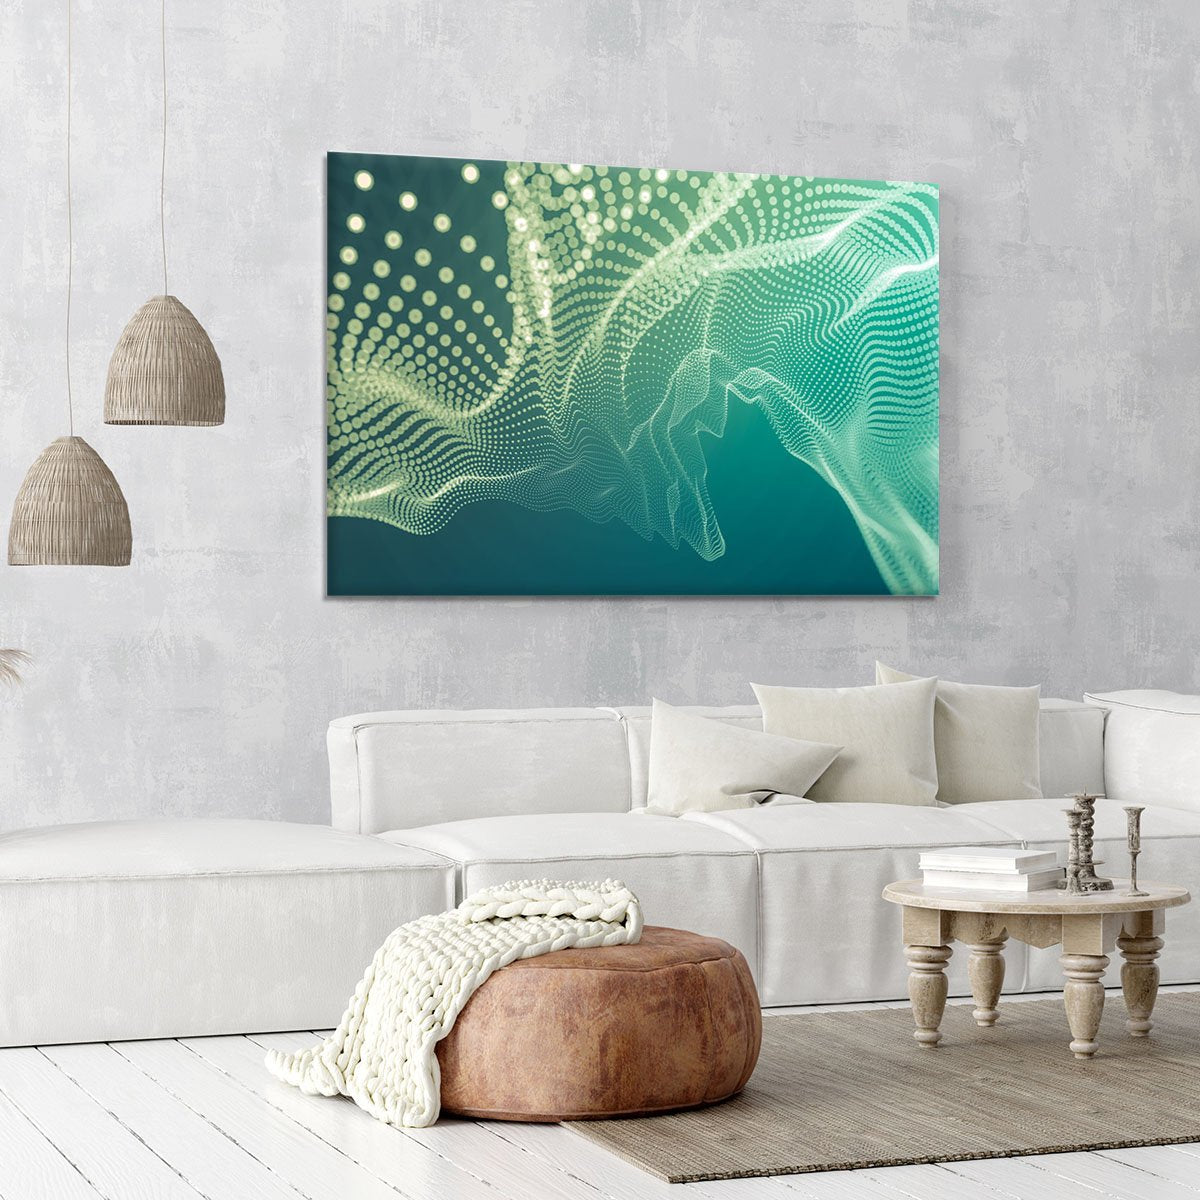 Dimensional Dots Canvas Print or Poster